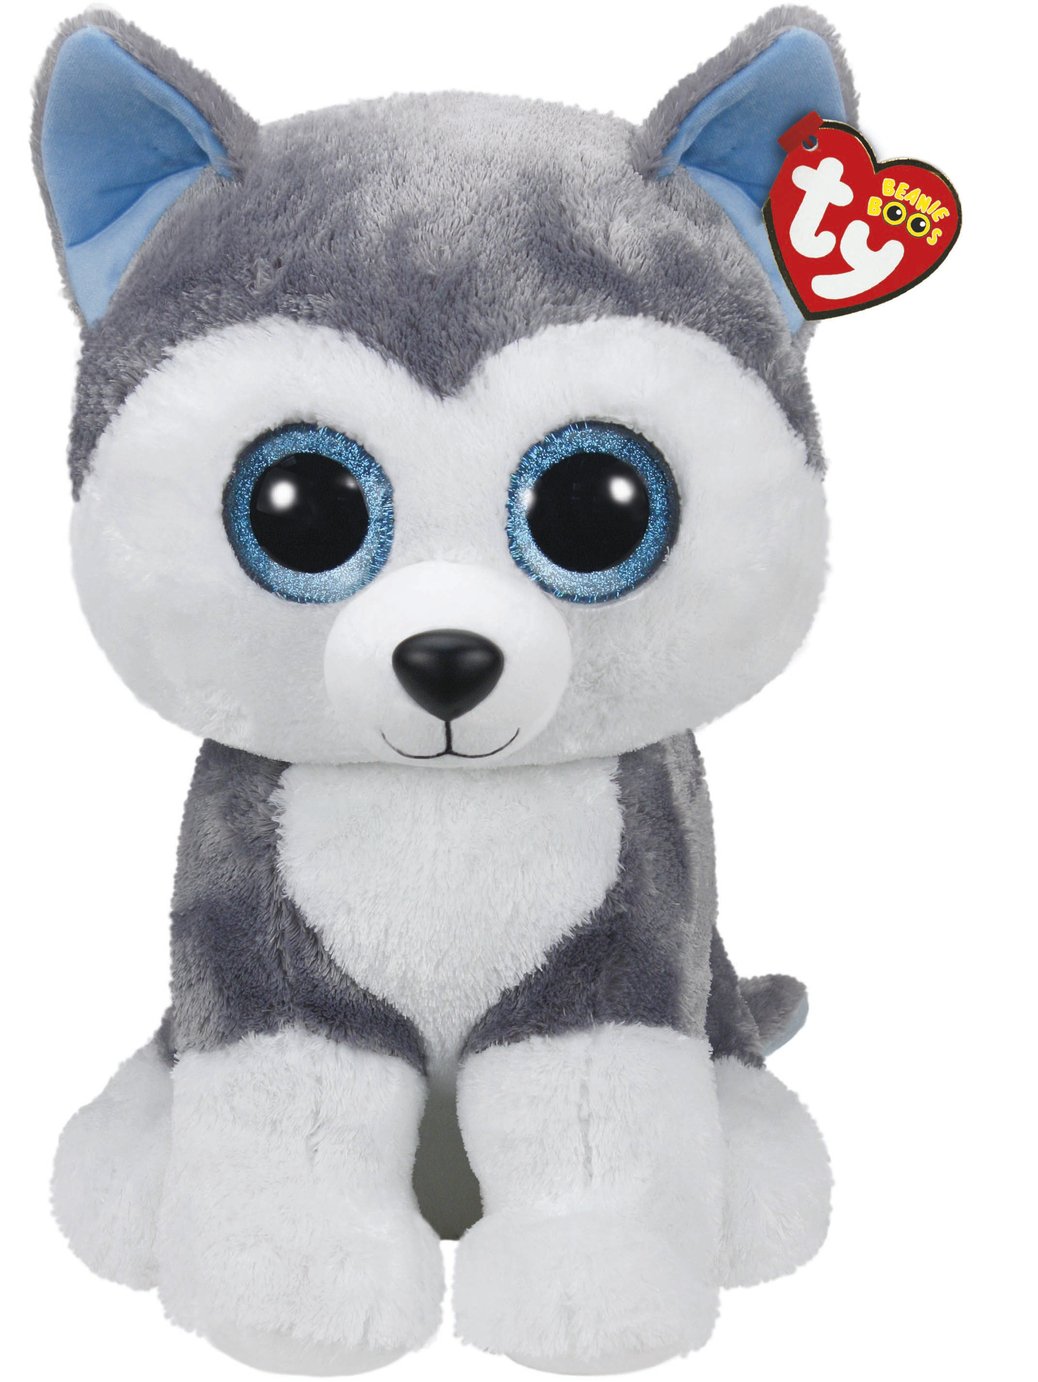 Ty Large 15 Inch Slush Beanie Boo Review